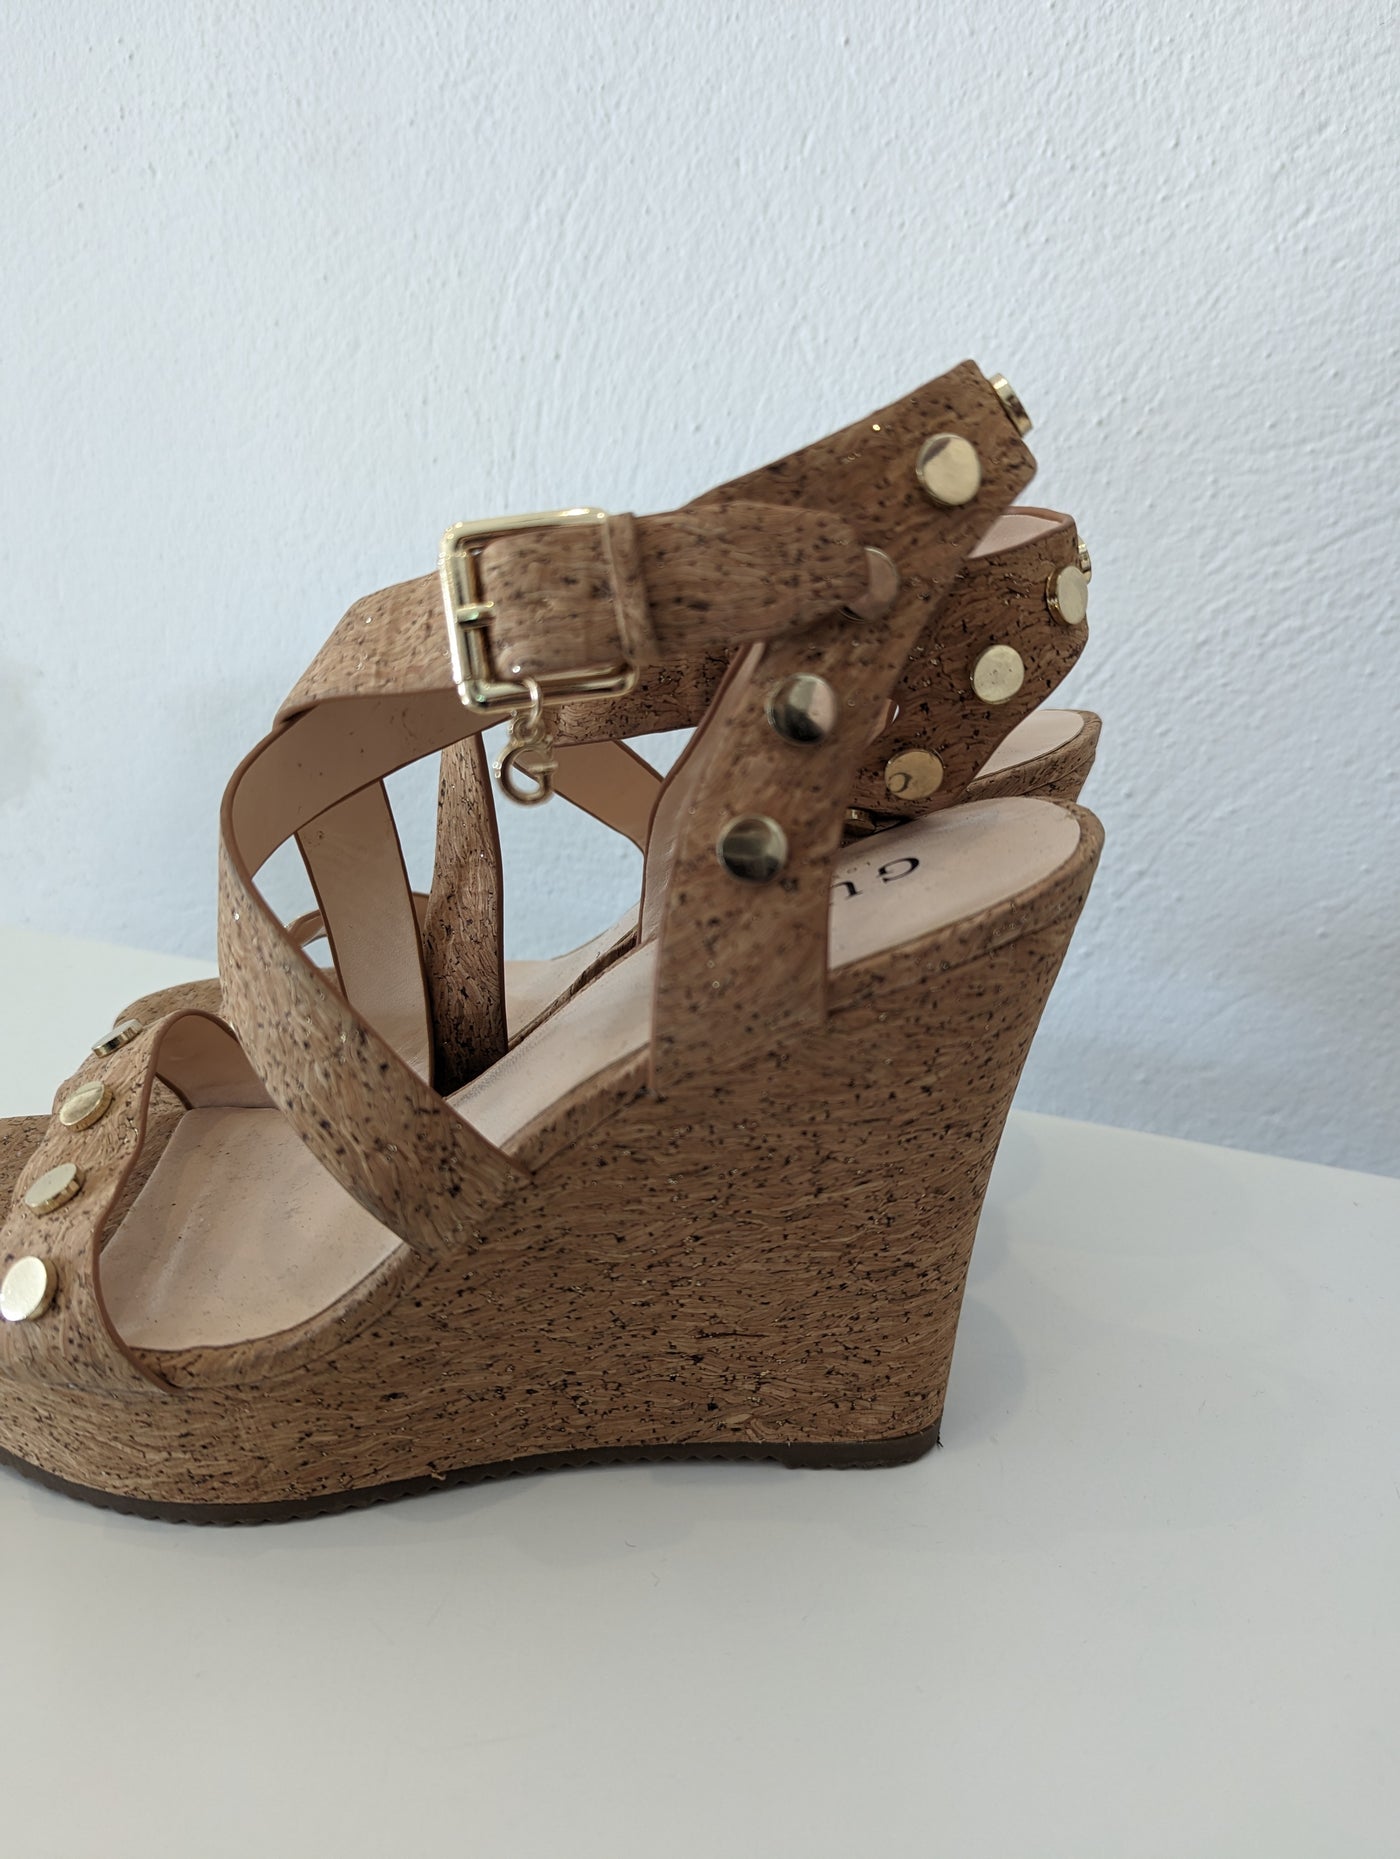 Guess Cork Wedge Size 6